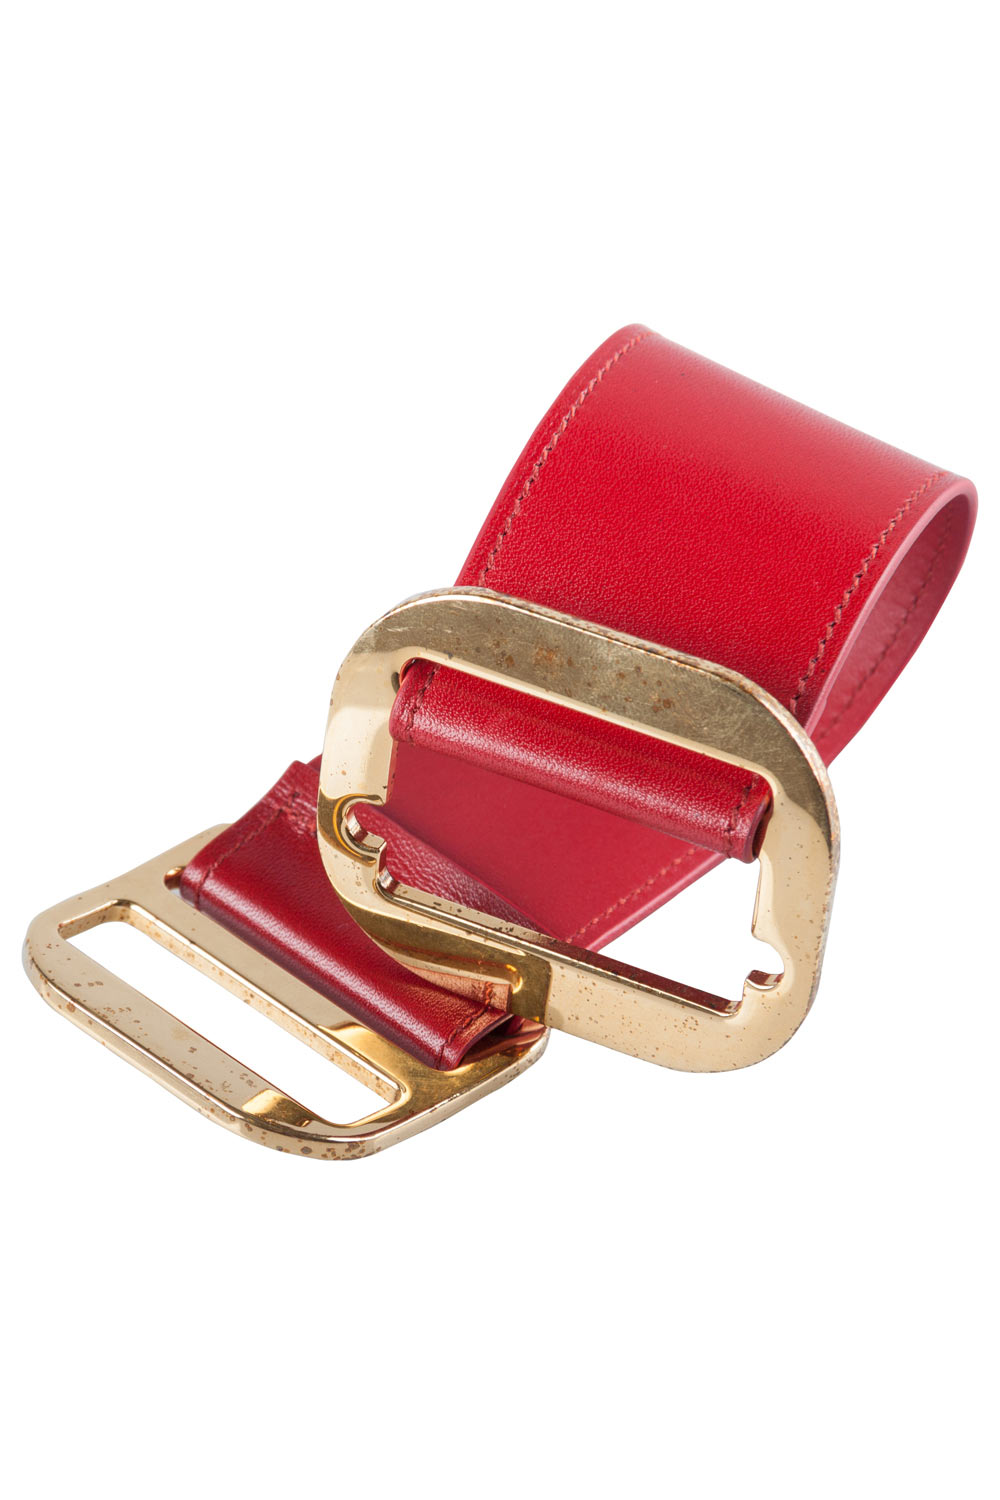 Pre-owned Chloé Red Leather Gold Tone Wide Bracelet